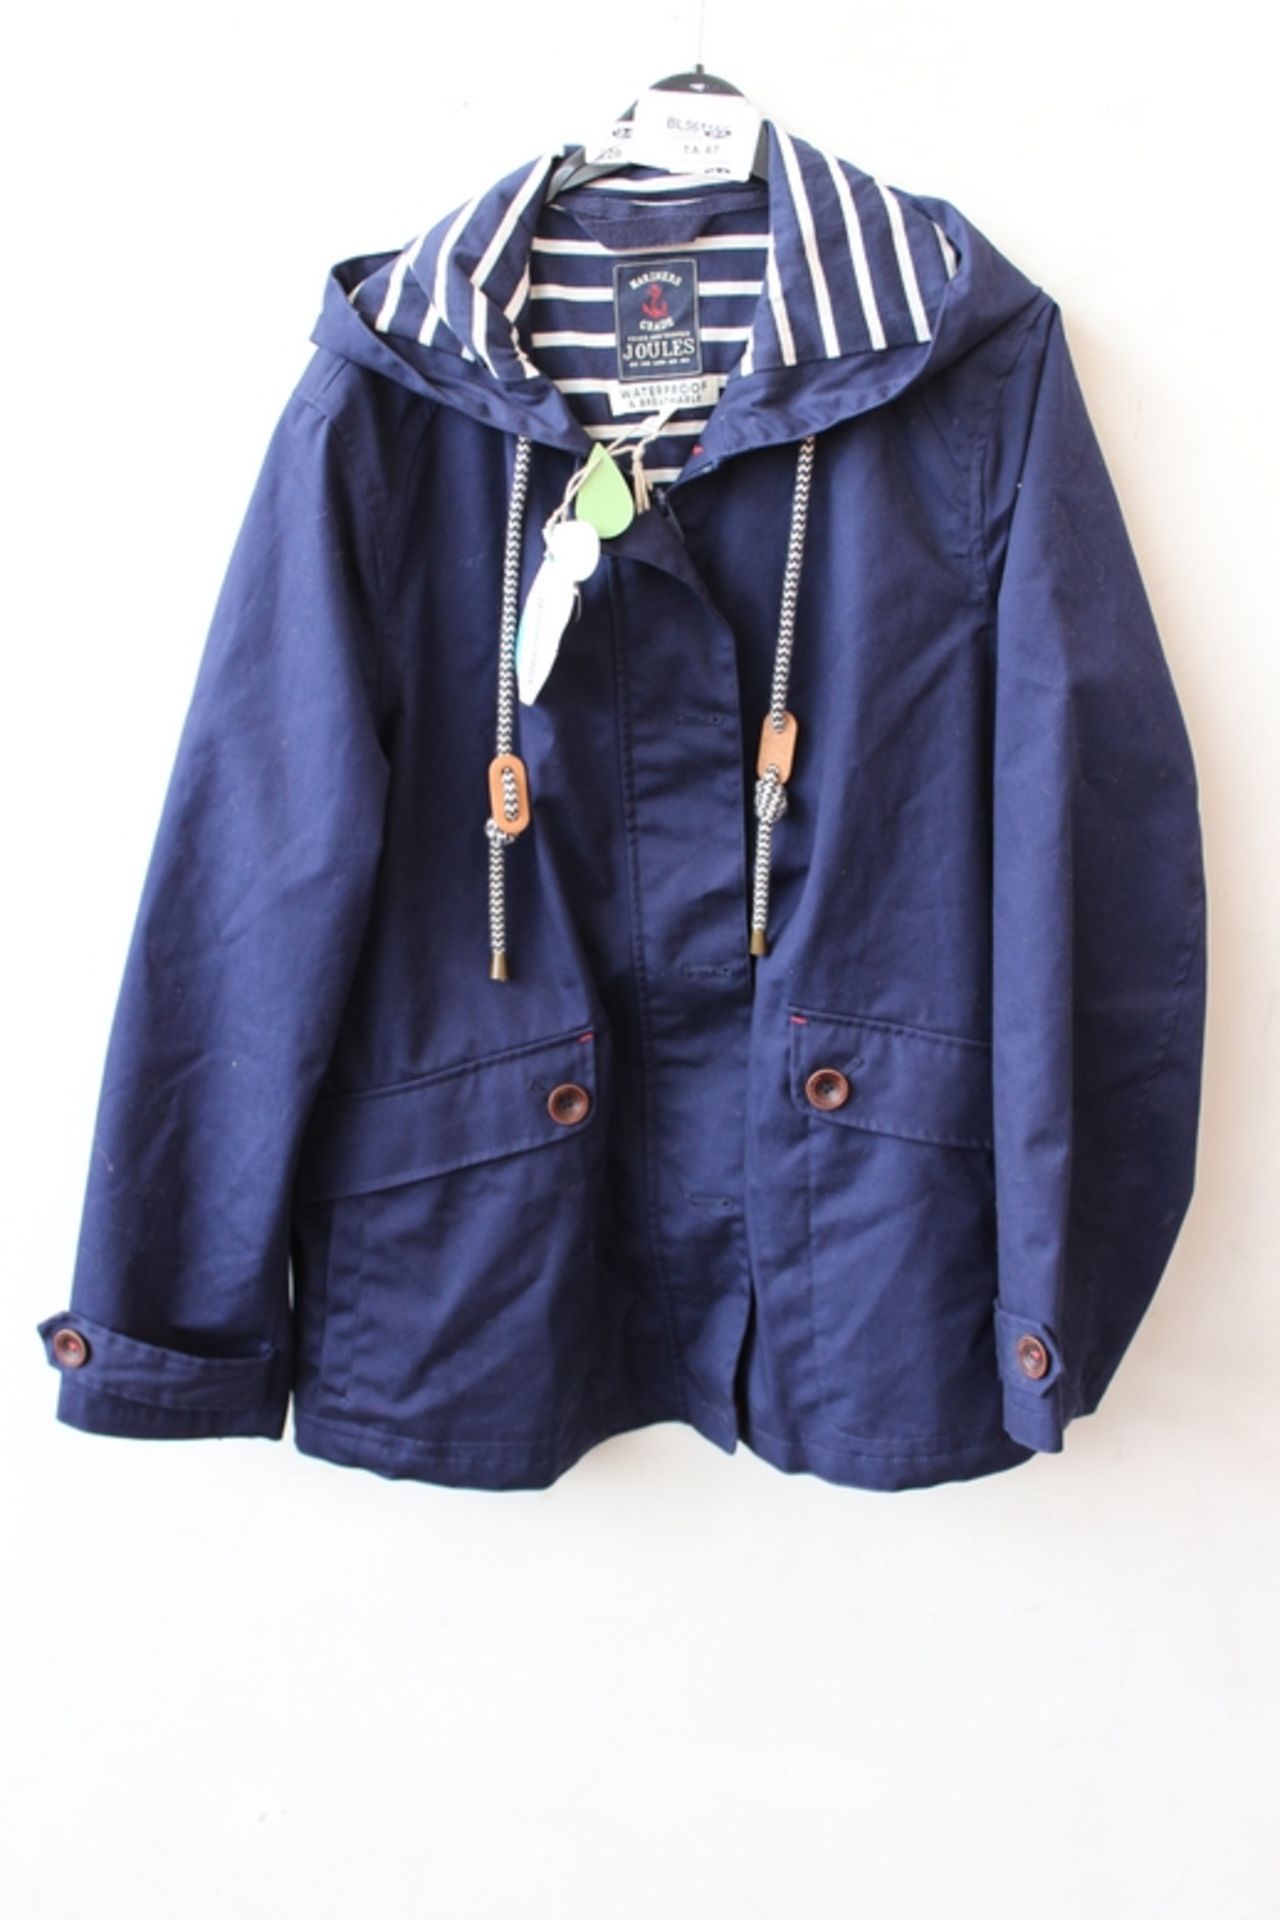 ONE JOULES WATERPROOF AND BREATHABLE COAT SIZE 16 RRP £69.95 (BL561166)